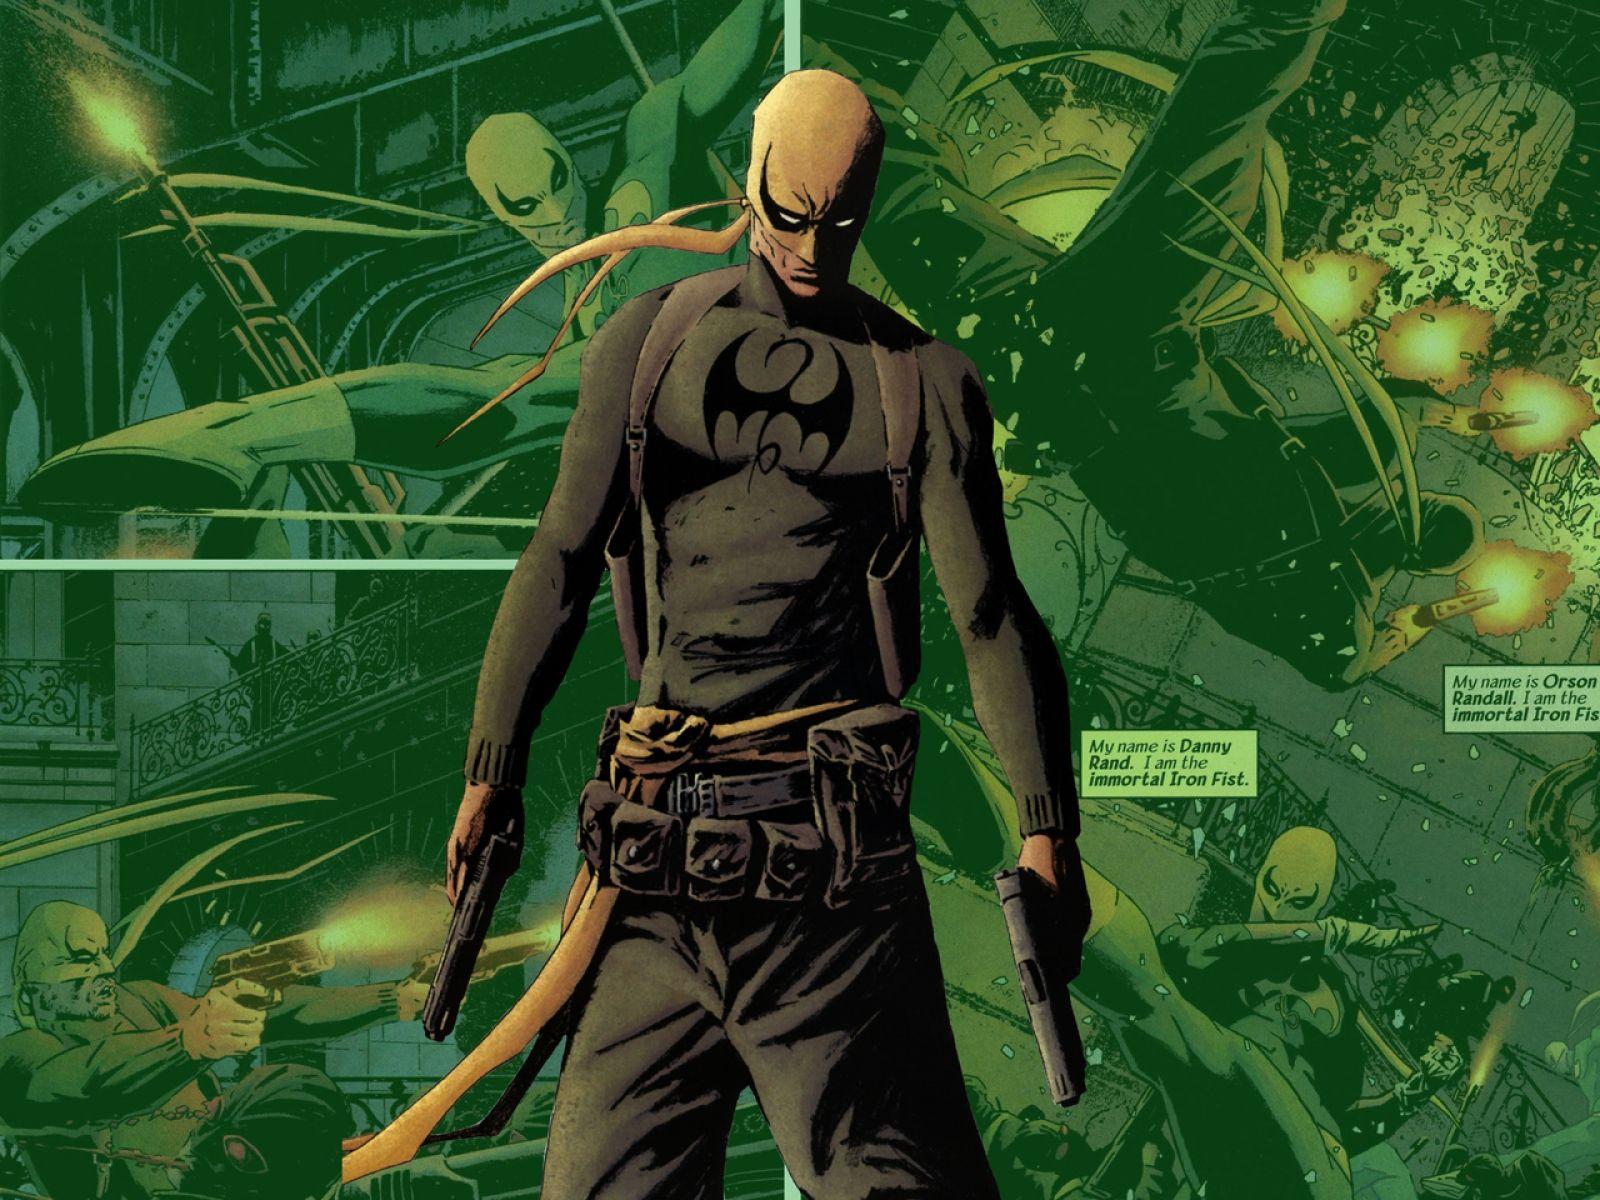 One thing i expect in Iron Fist season 2